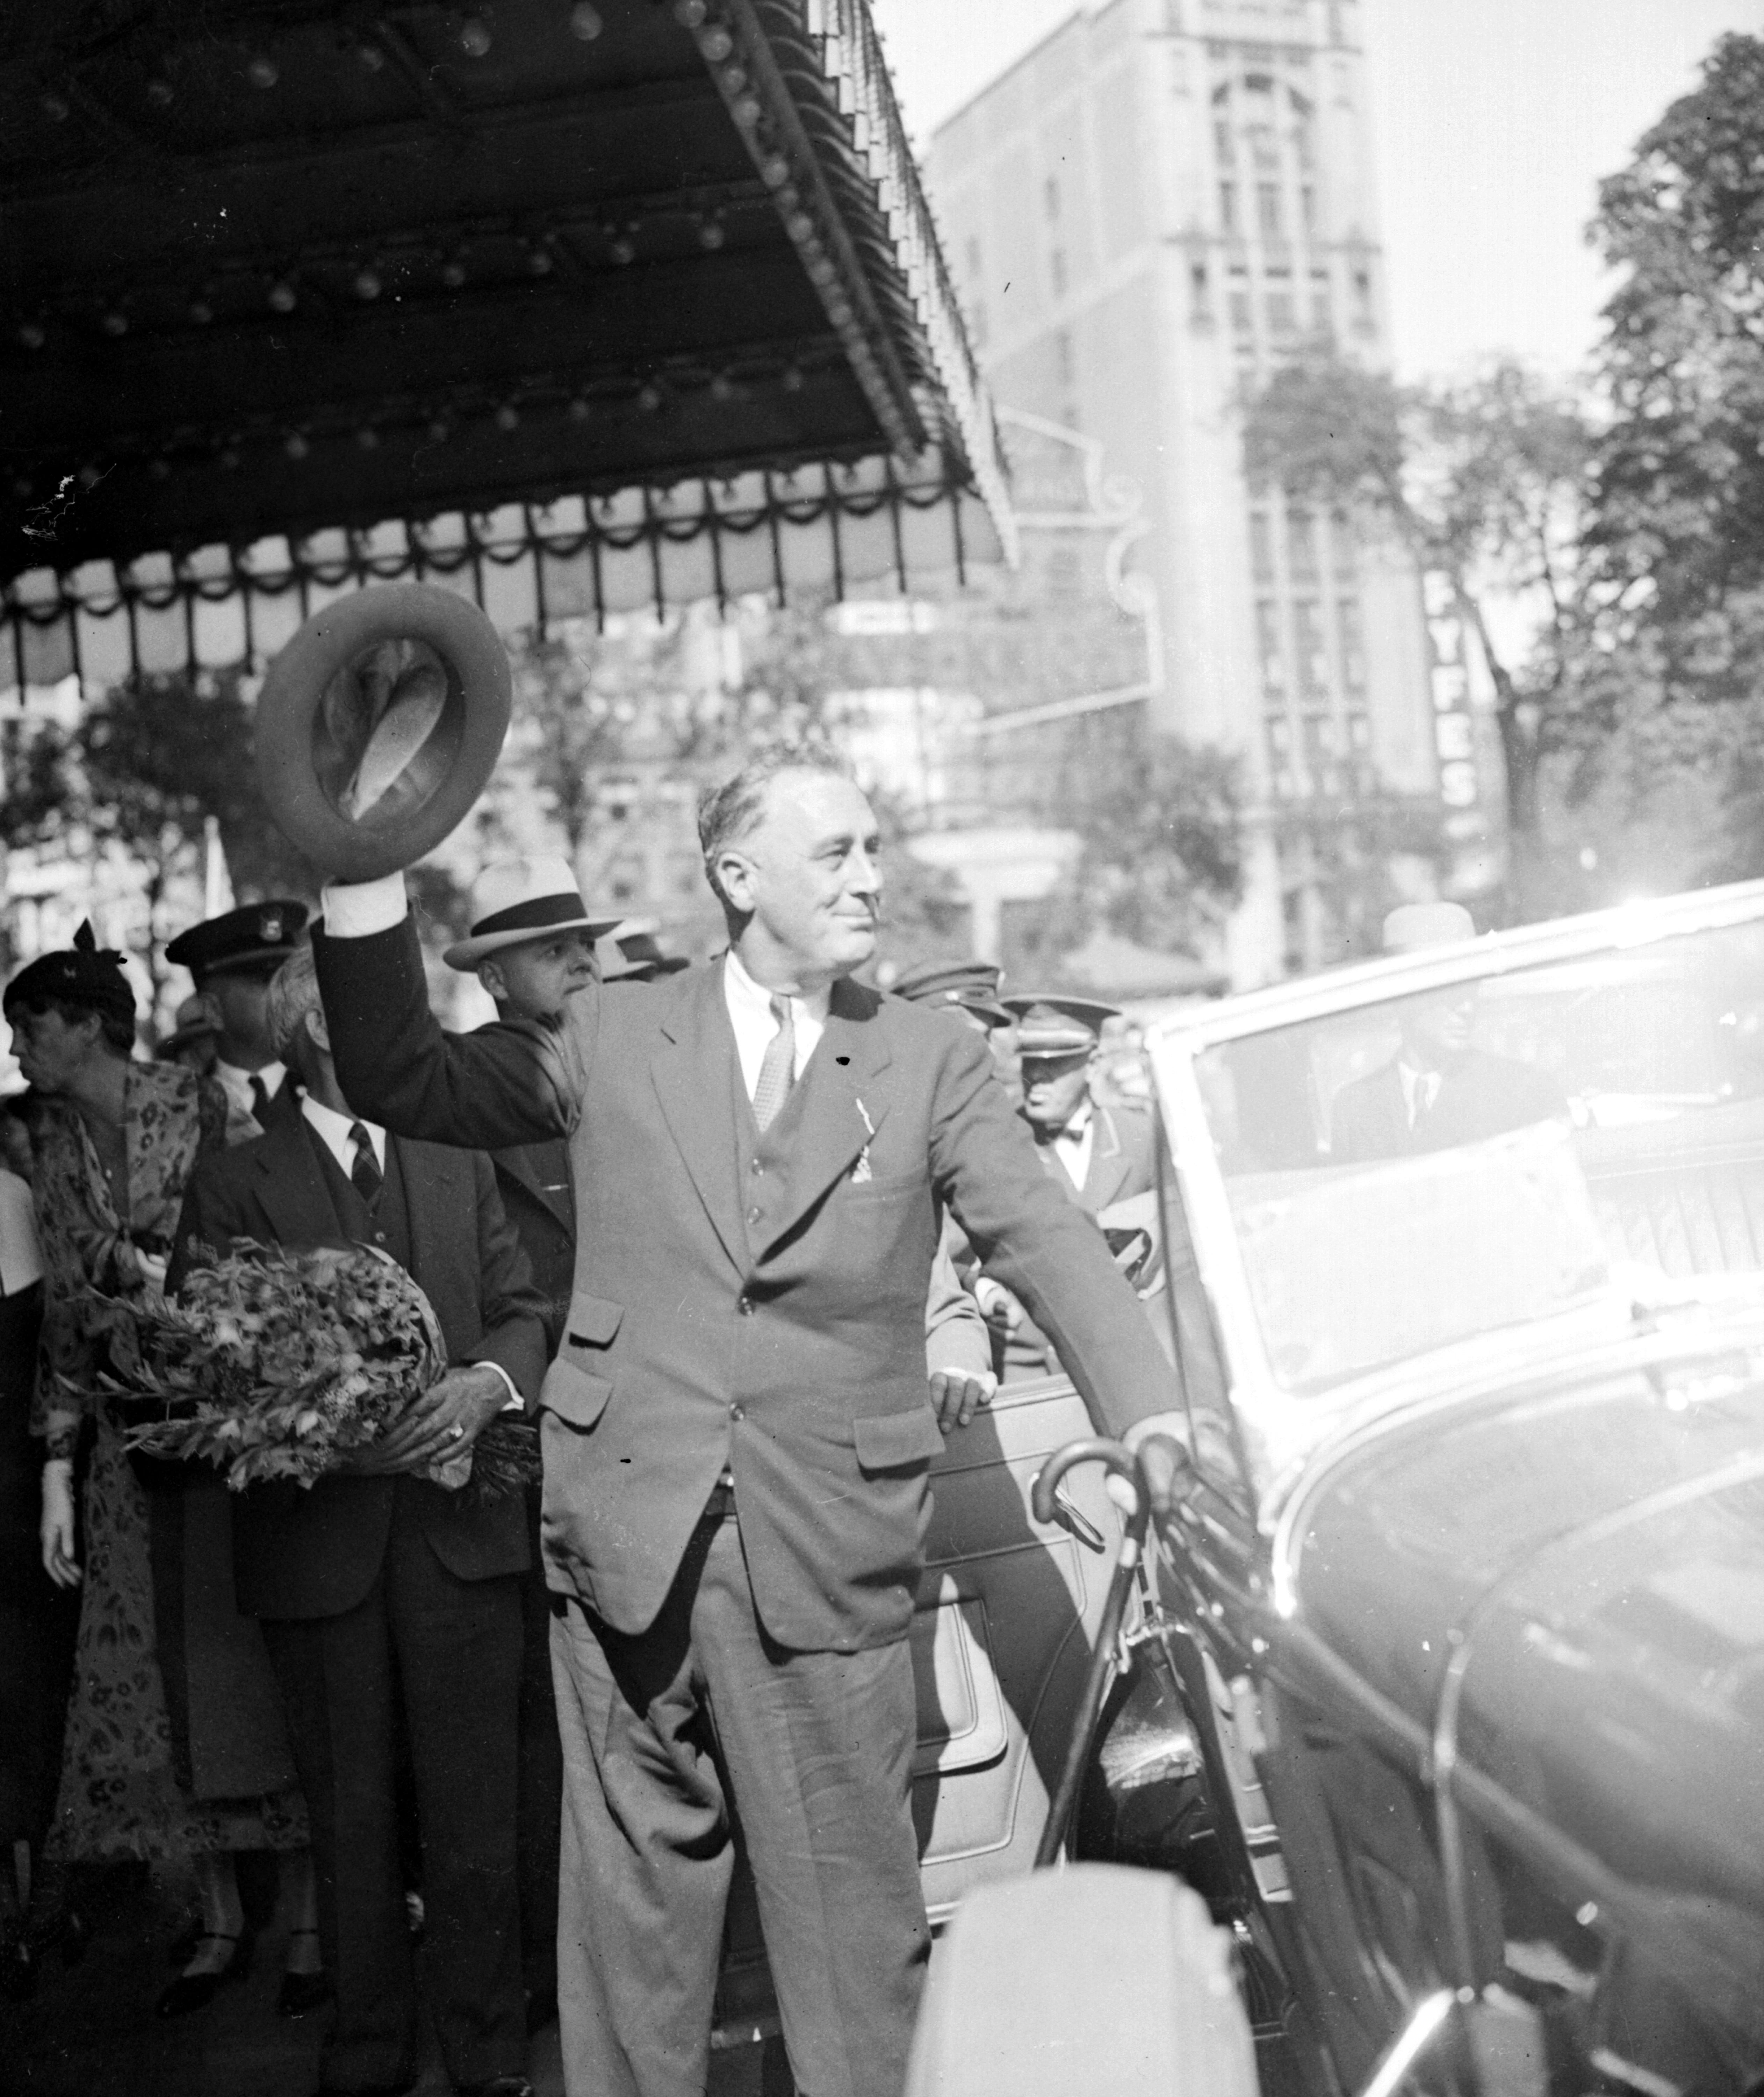 President Franklin D. Roosevelt arrives at Michigan Central Depot, now called Michigan Central Station, on Oct. 1, 1943. Roosevelt was one of at least three presidents to disembark through the depot, along with Presidents Herbert Hoover and Harry S. Truman.